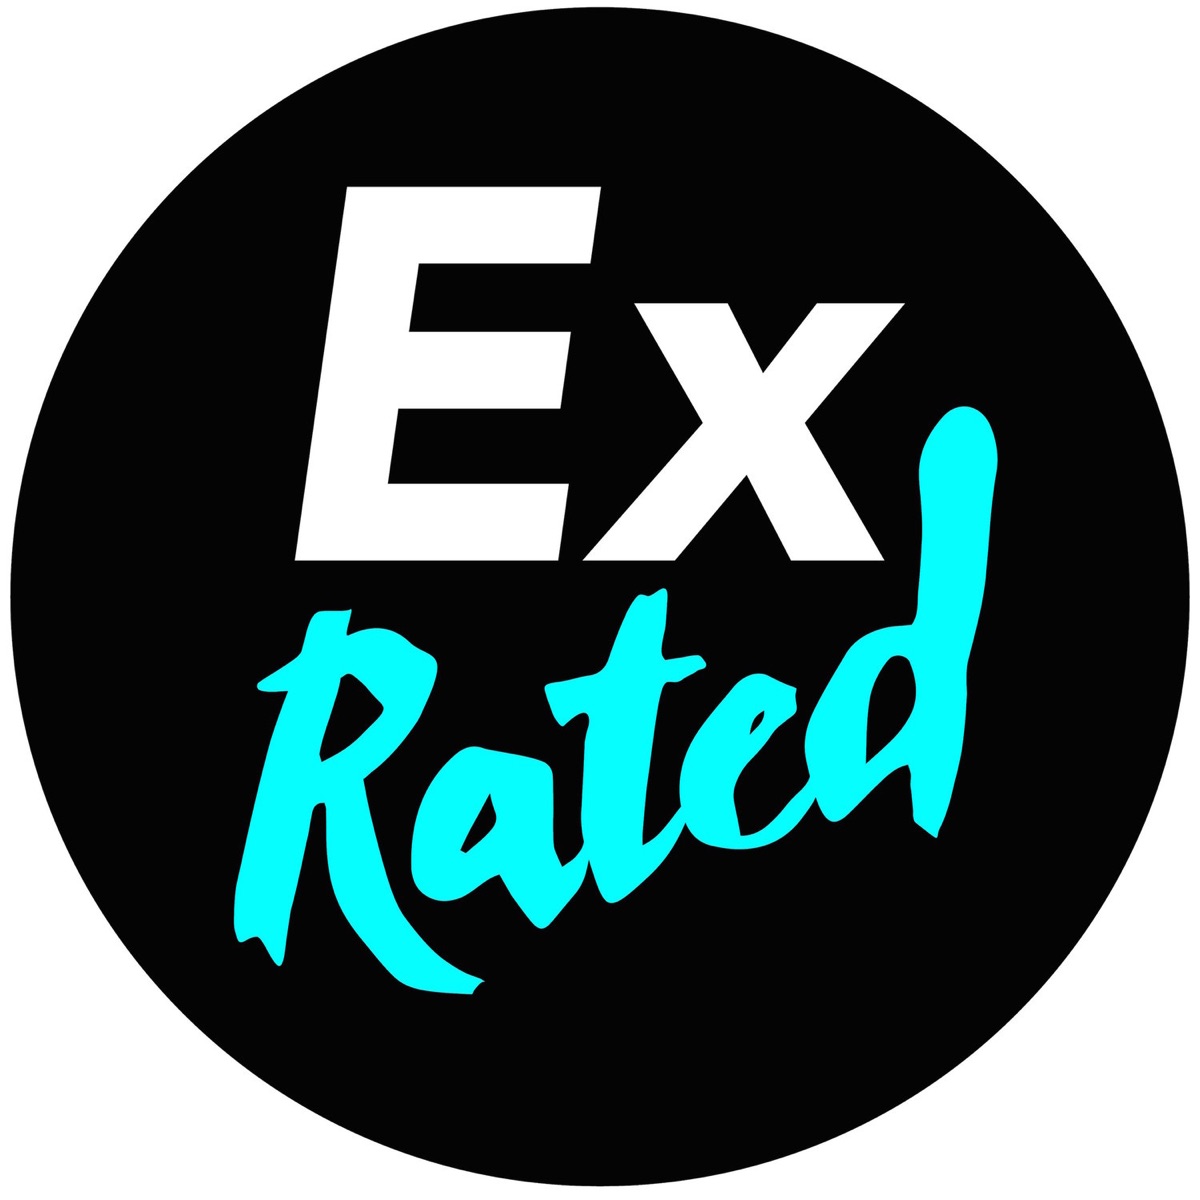 §Éx. Rated movies